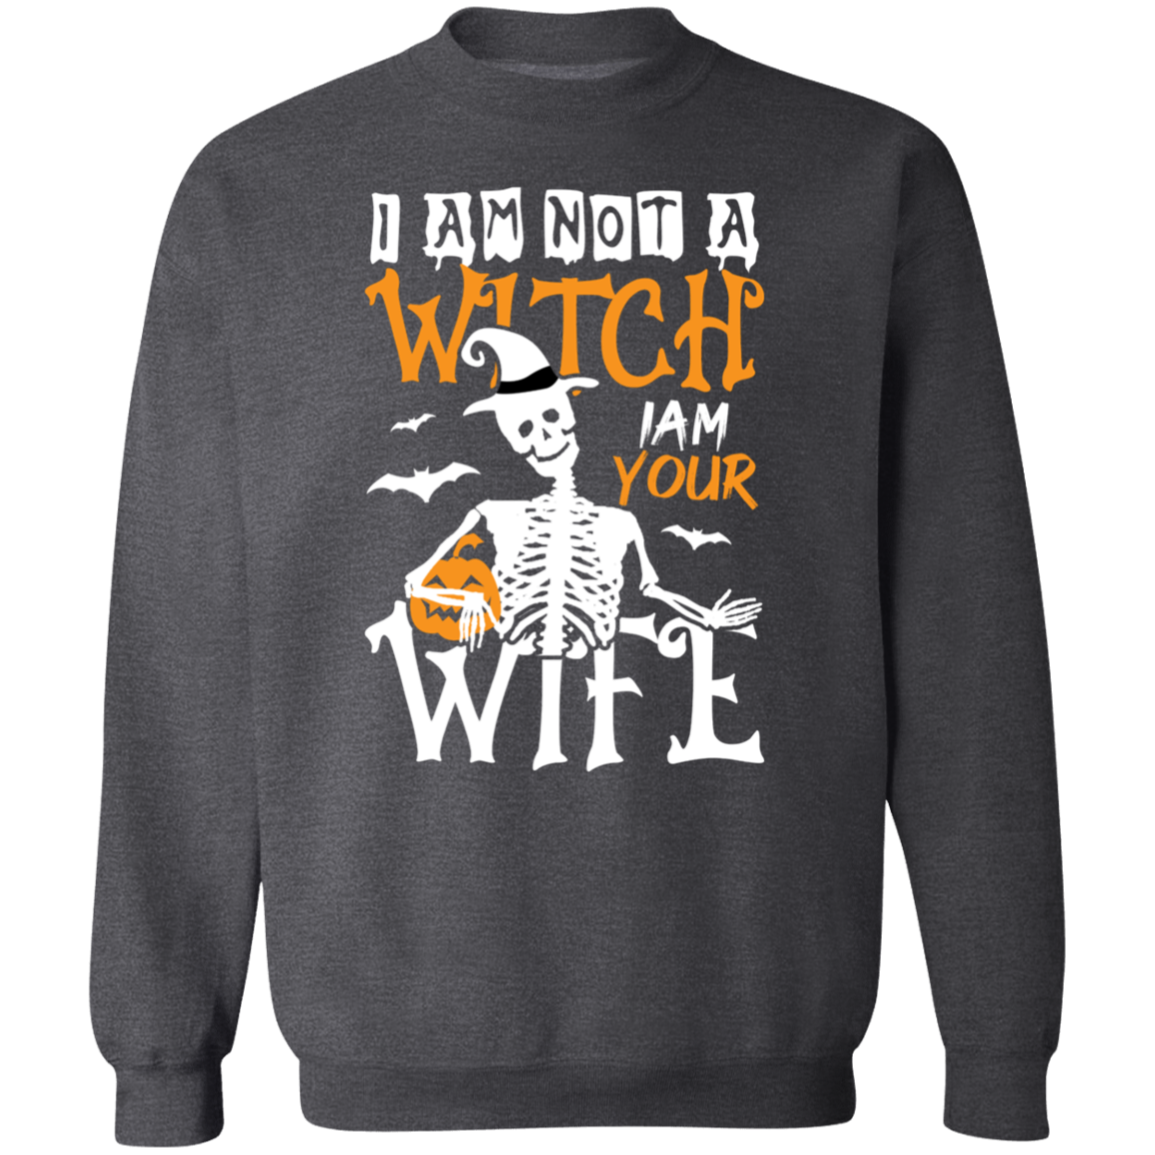 I'M NOT A WITCH - I'M YOUR WIFE SWEATSHIRT